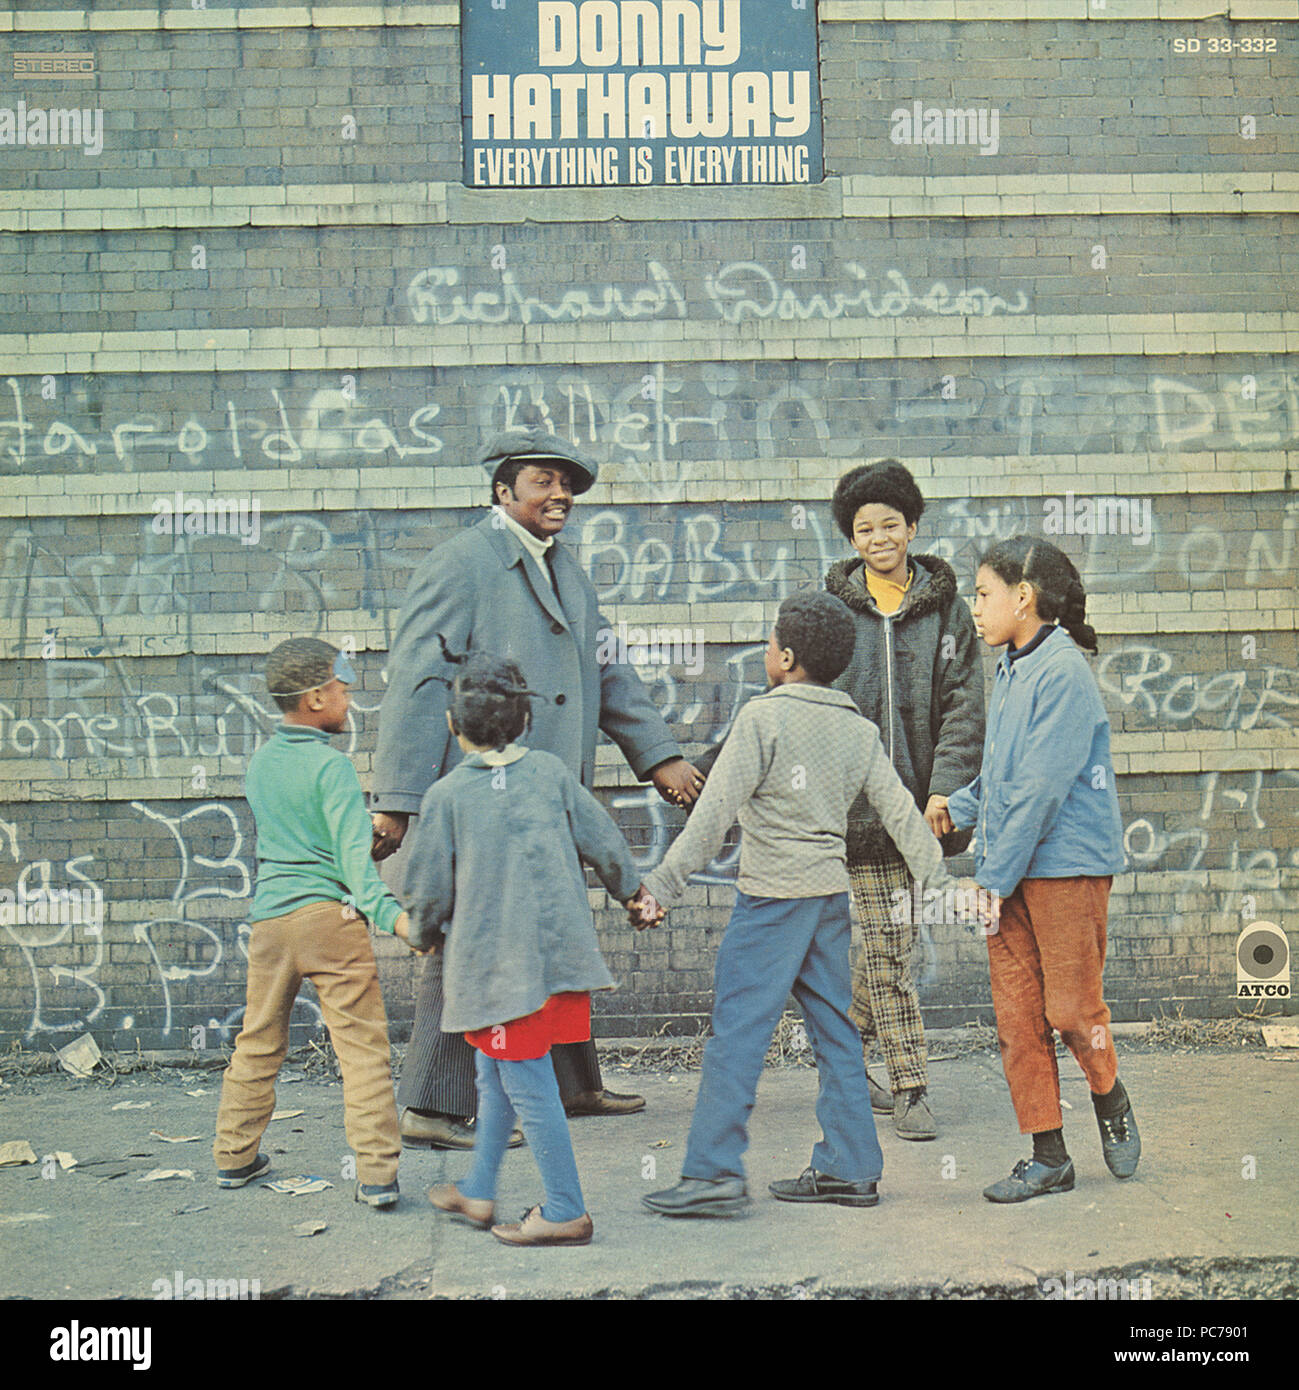 Donny Hathaway – Everything is Everything  -  vintage vinyl cover album (Front) Stock Photo